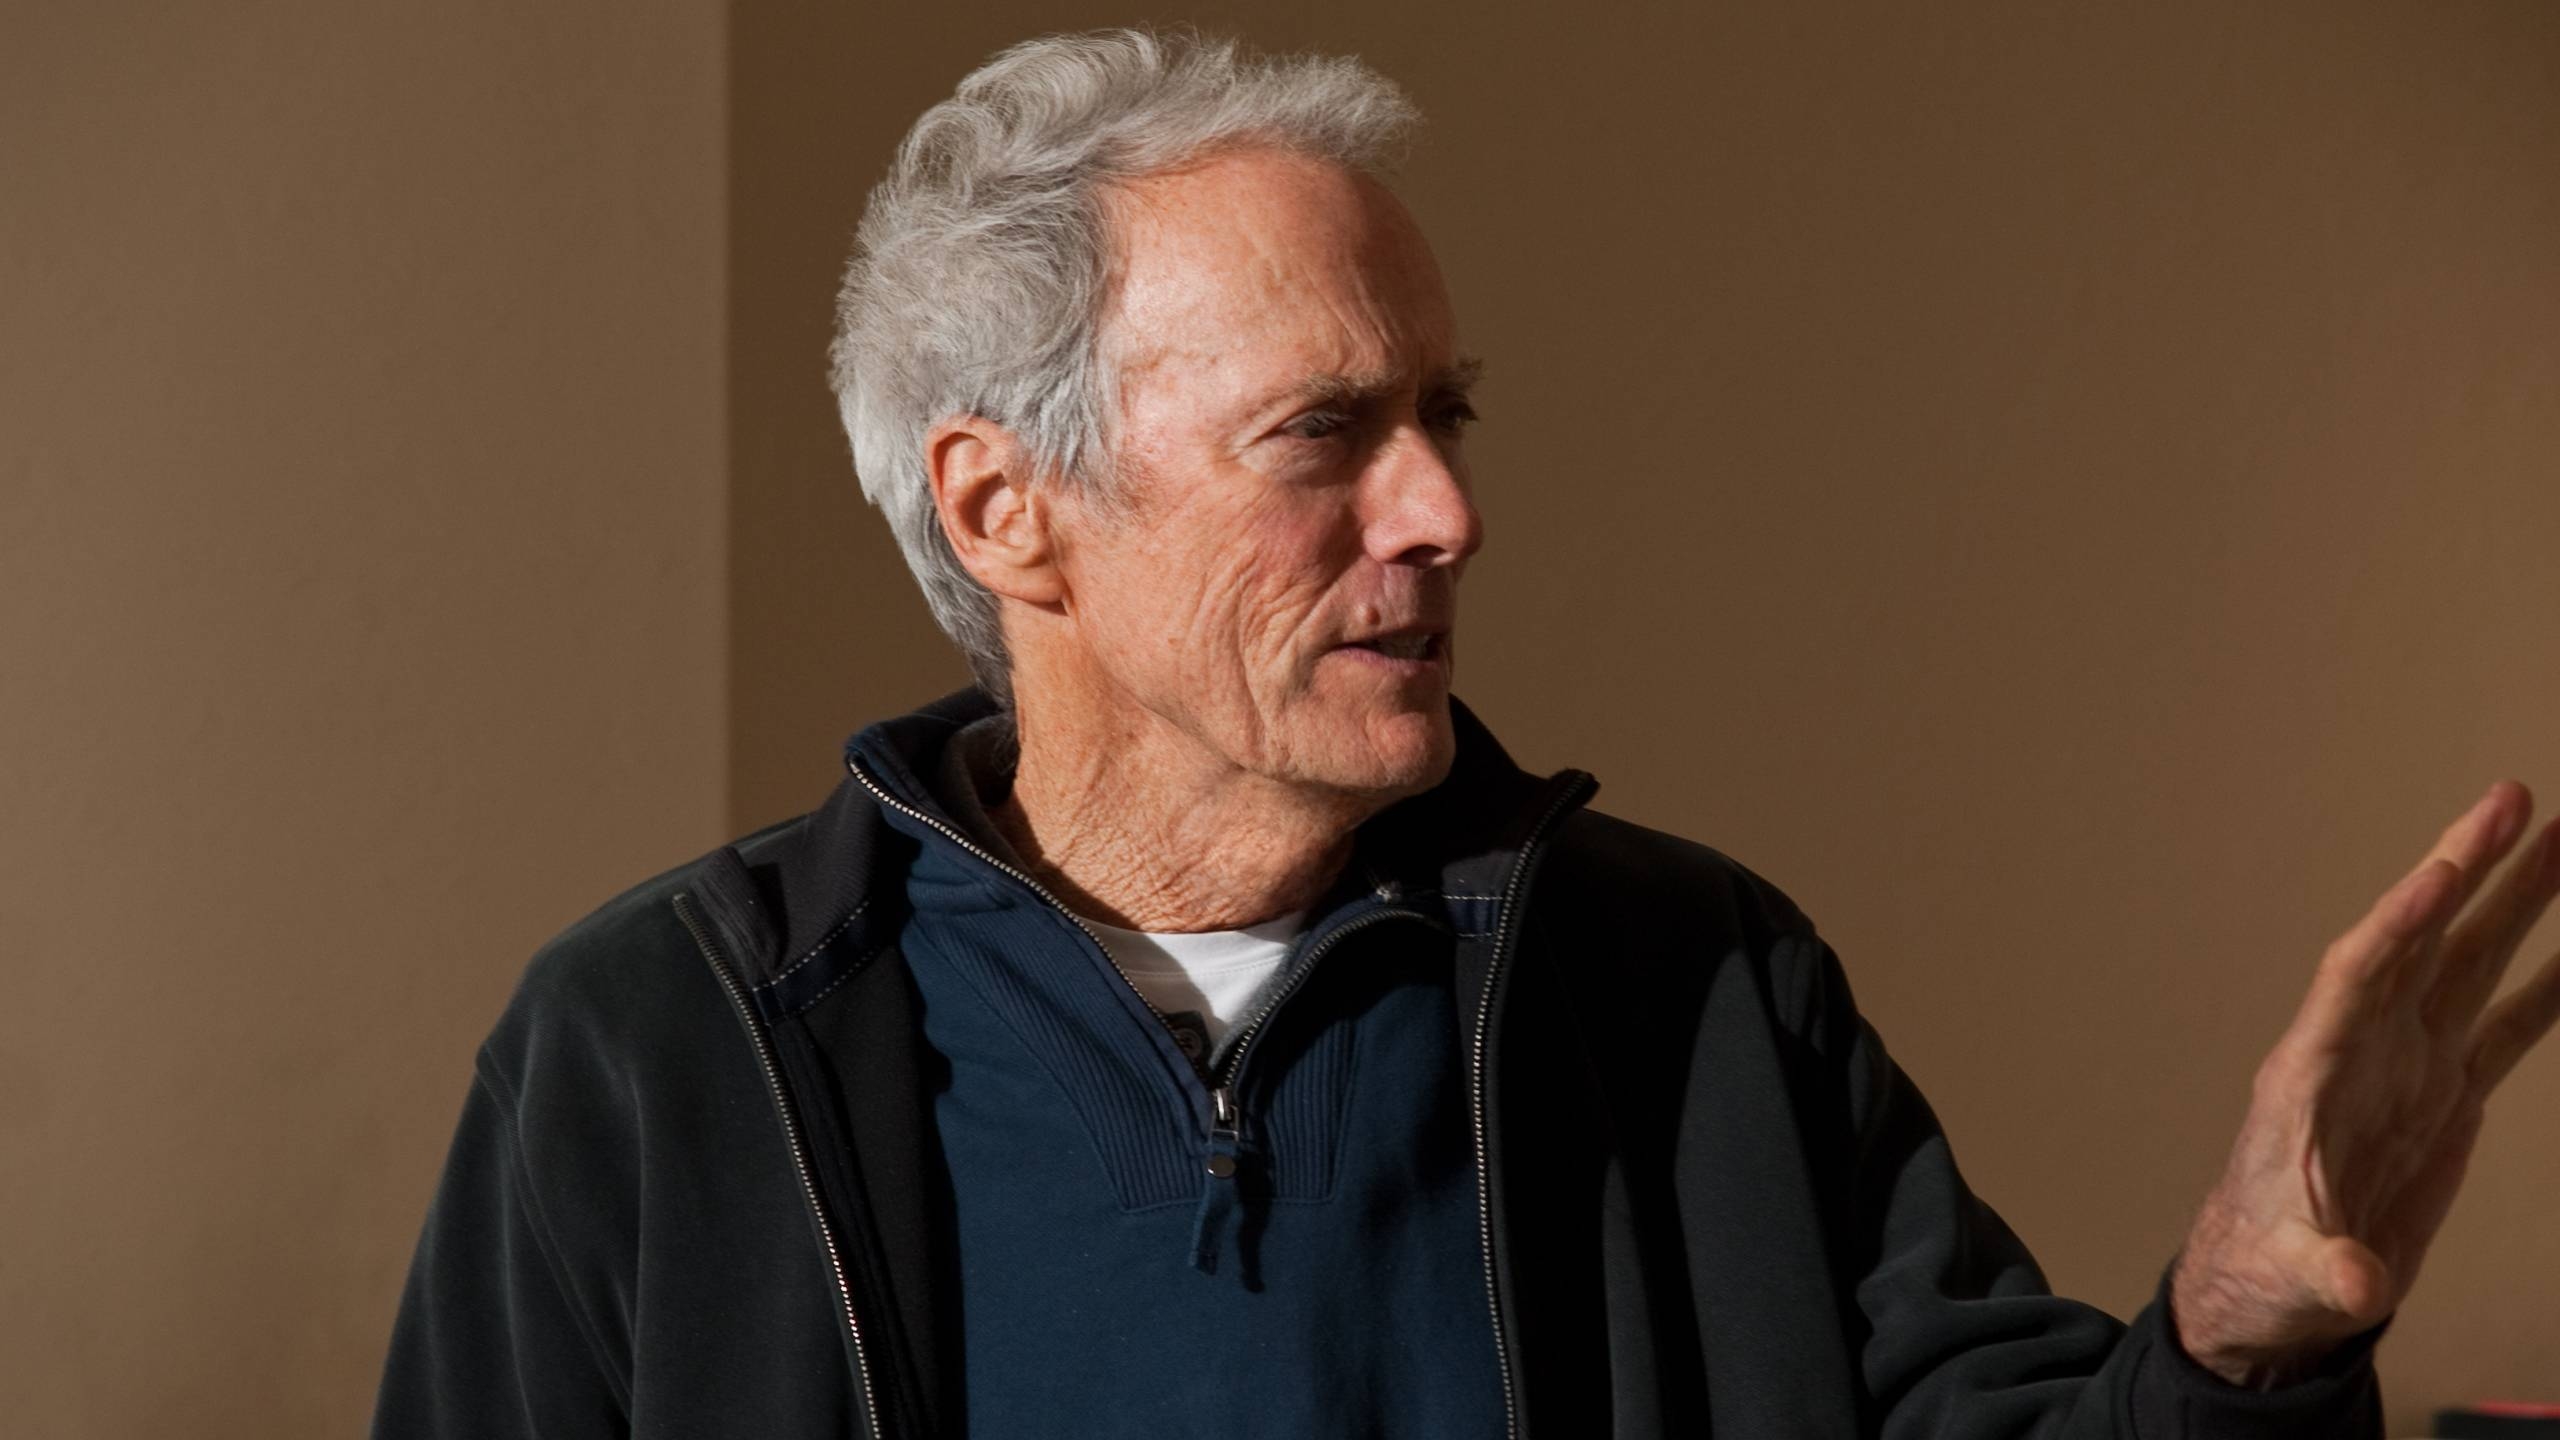 Clint Eastwood Close-Up for 2560x1440 HDTV resolution